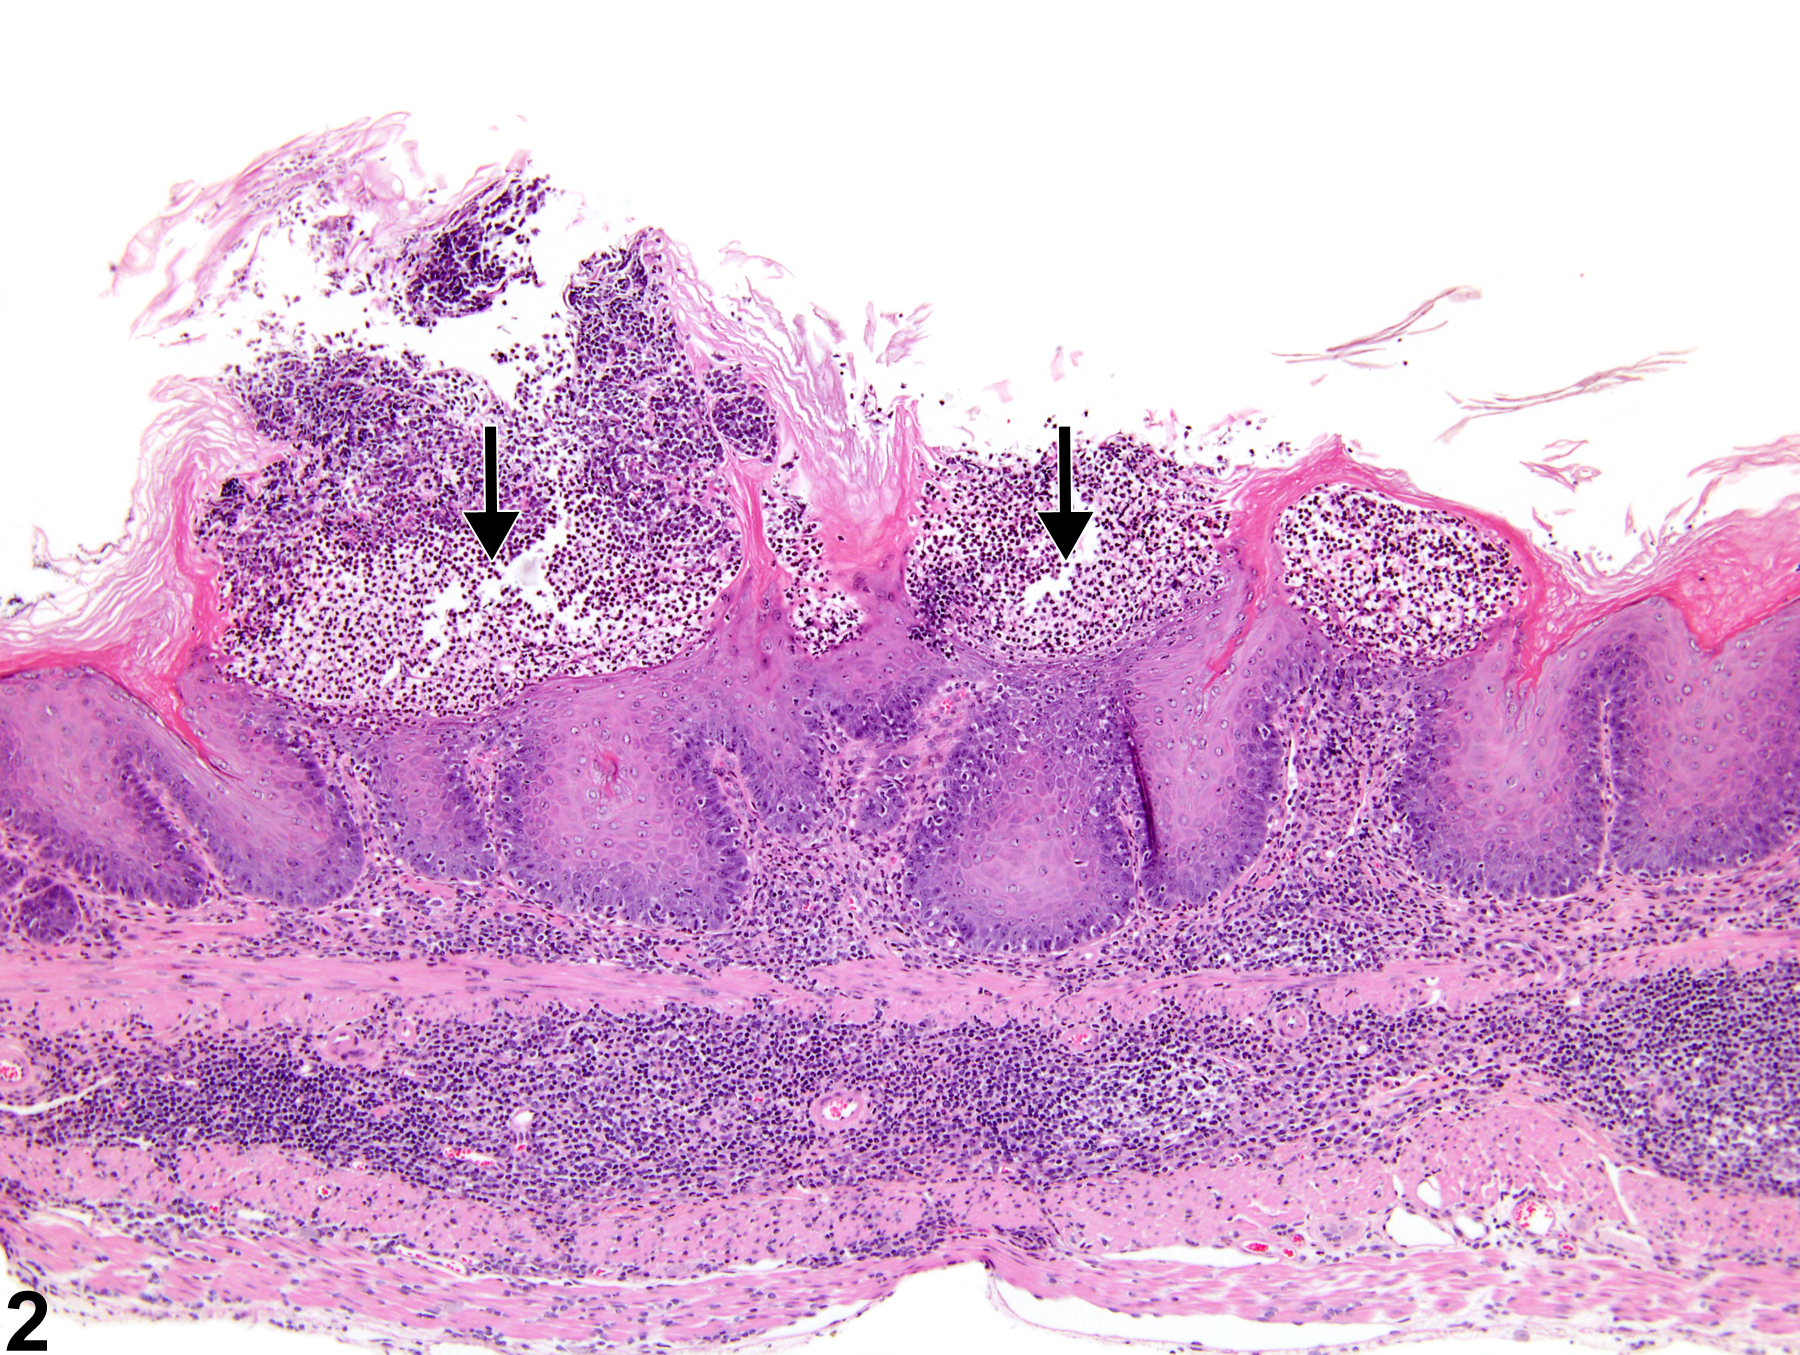 Image of erosion in the forestomach from a female B6C3F1 mouse in a chronic study